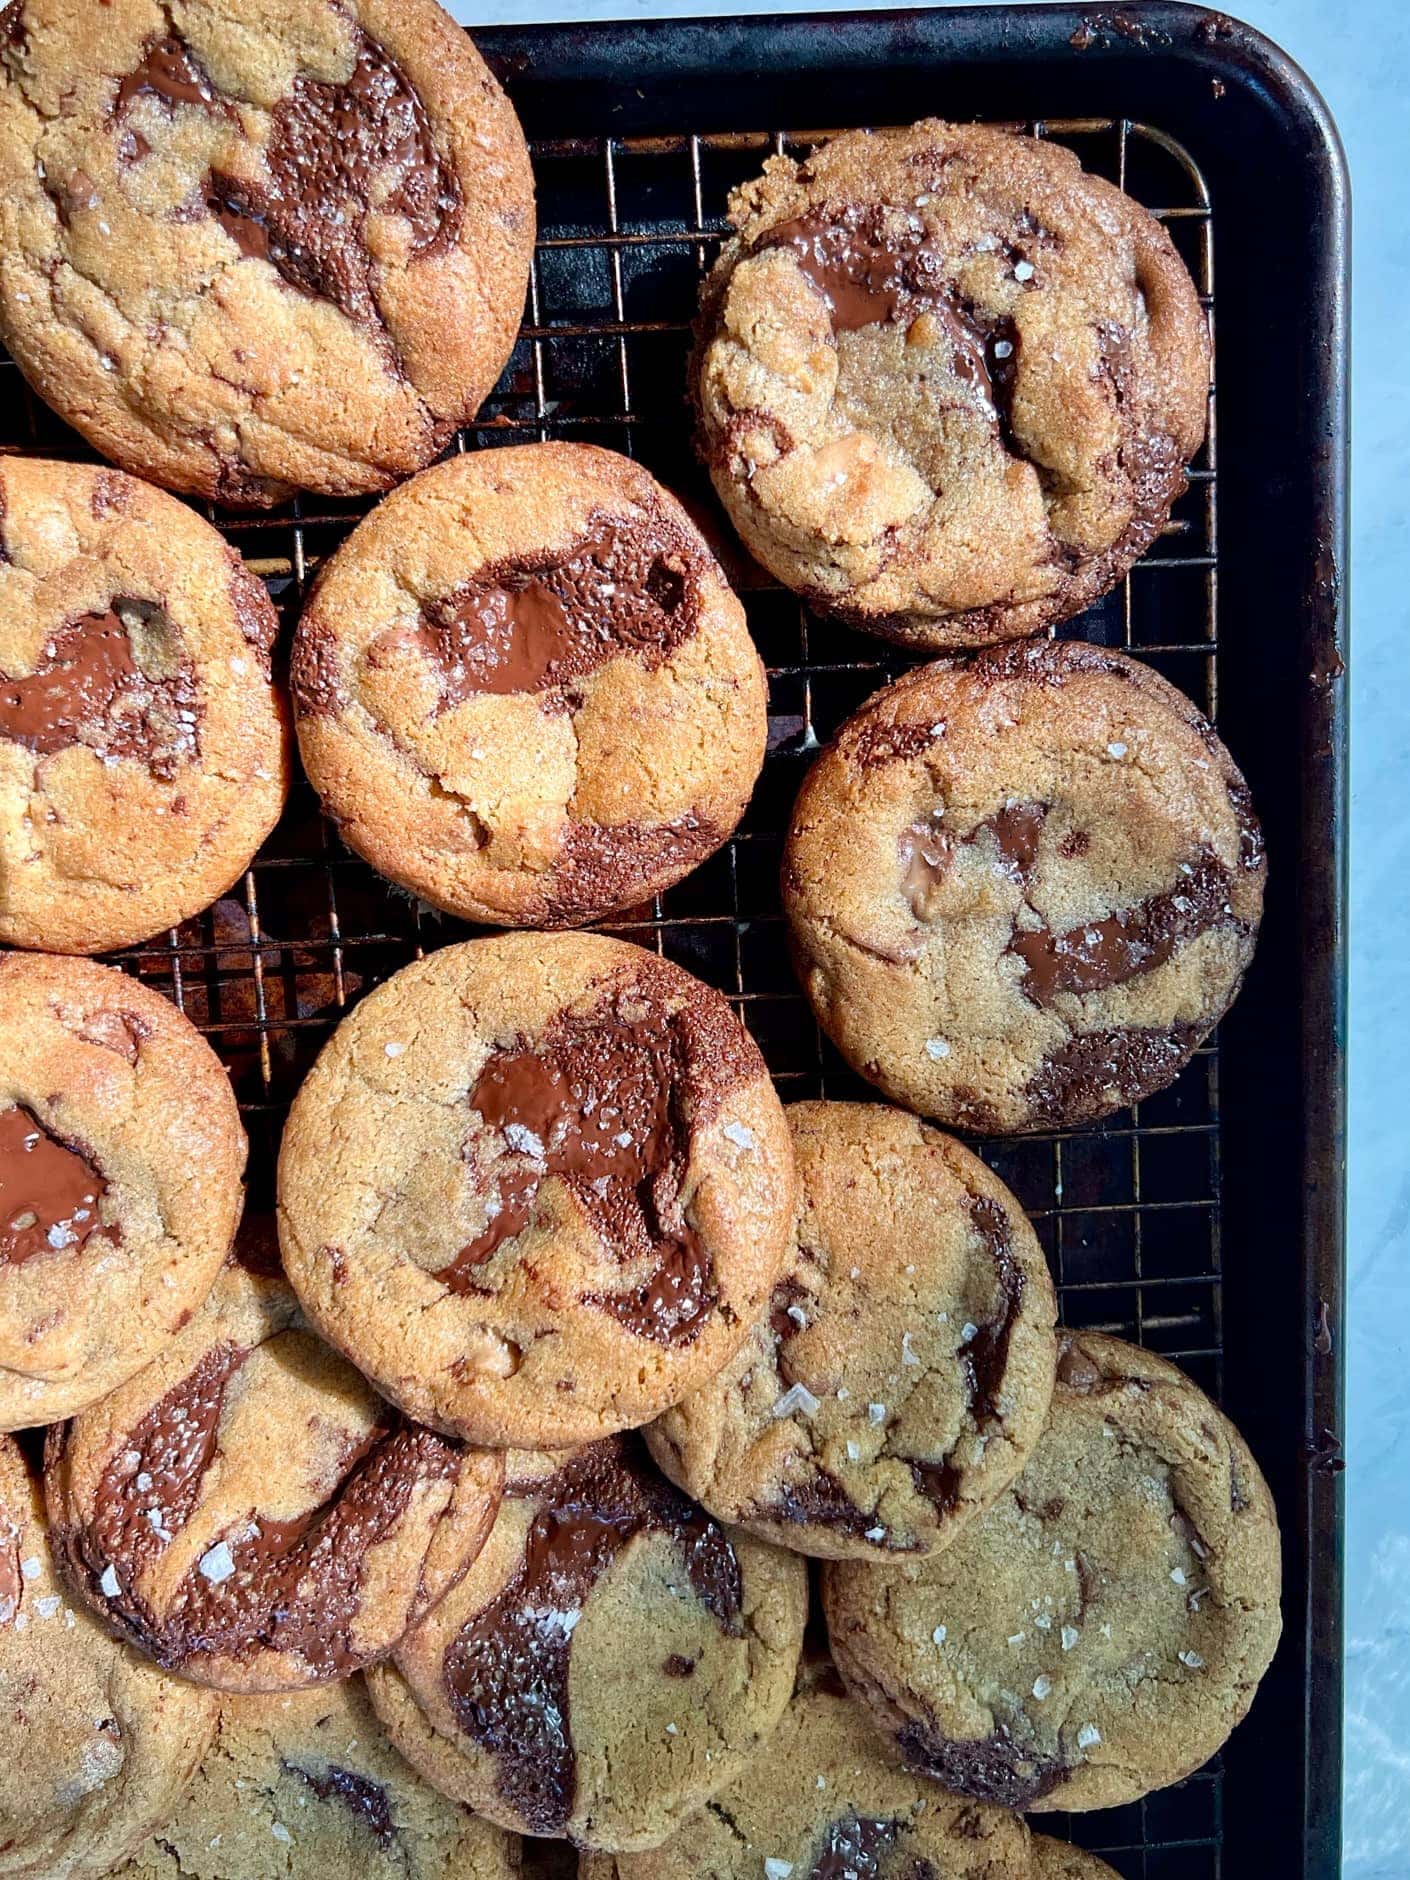 The Best Brown Butter Chocolate Chip Cookies